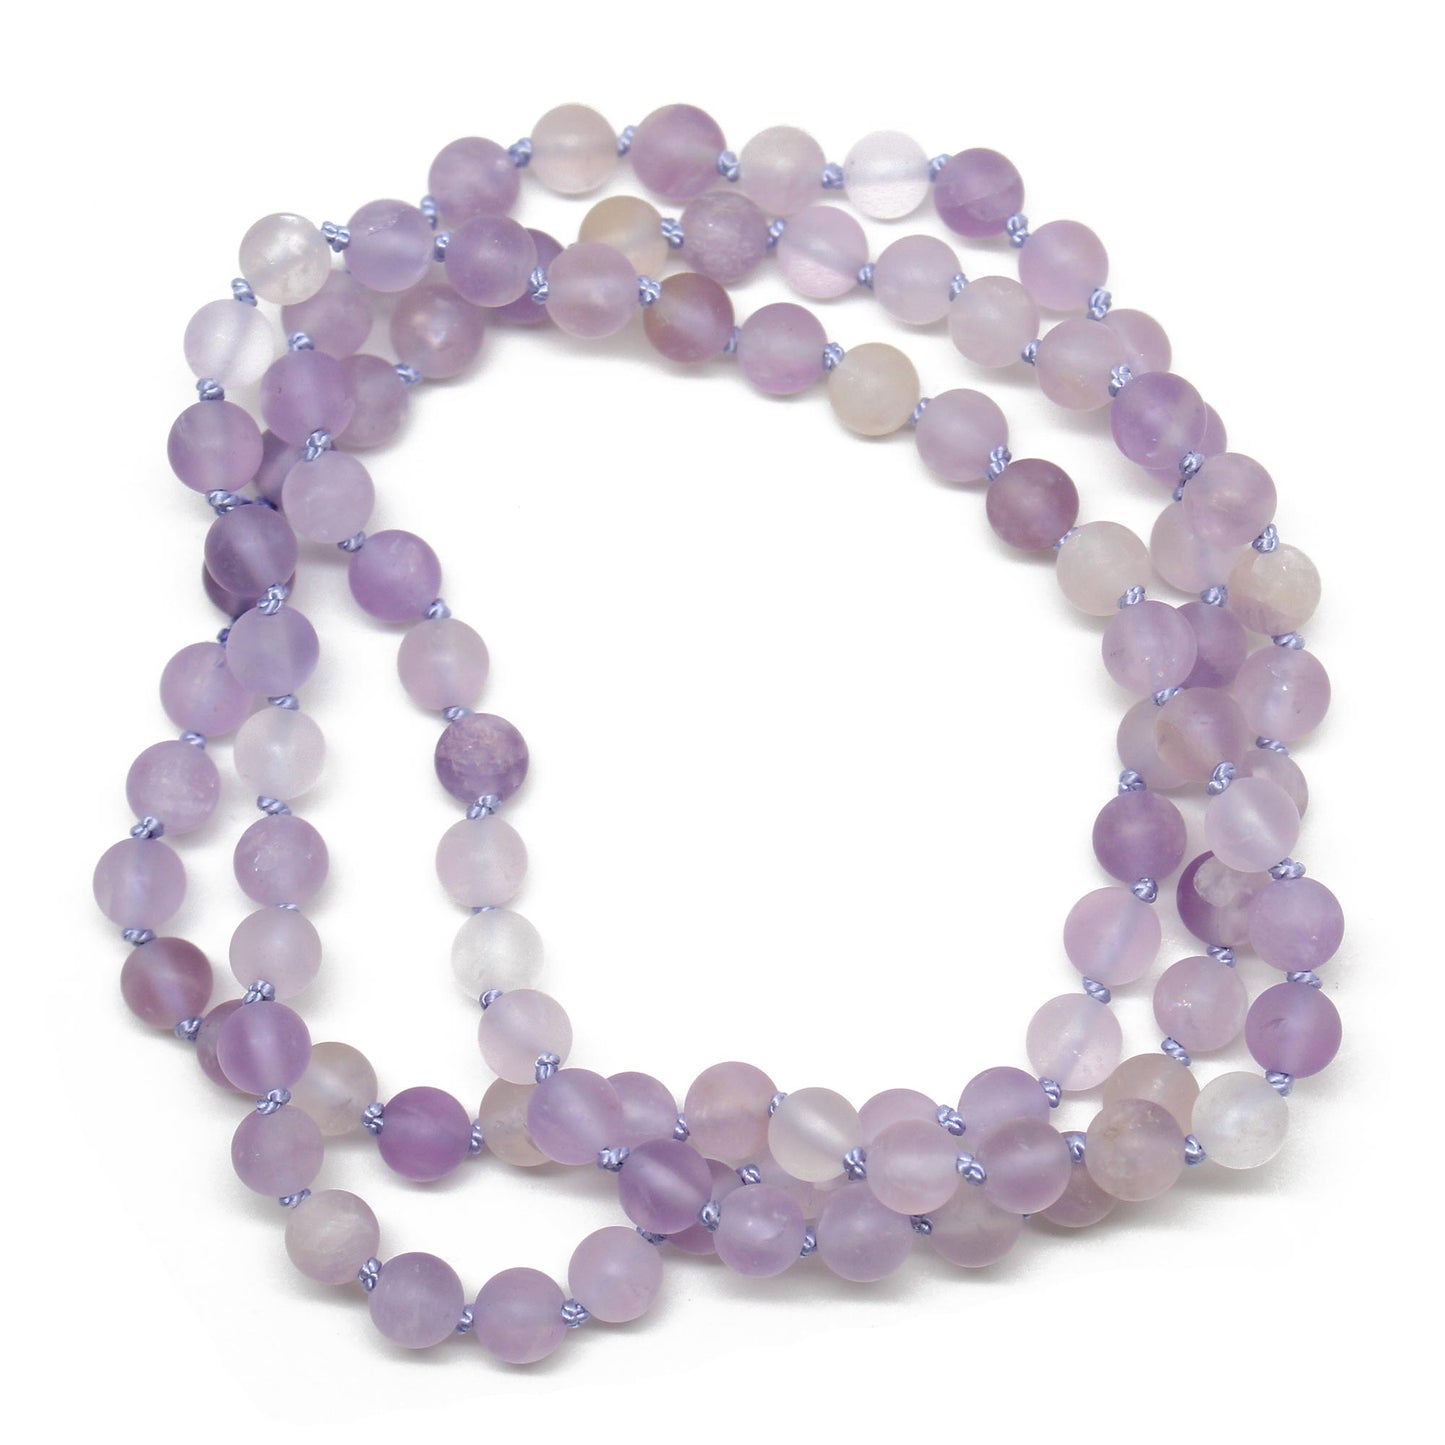 Hand Knotted Purple Ametrine Bead Necklace, 28" Long Endless Strand